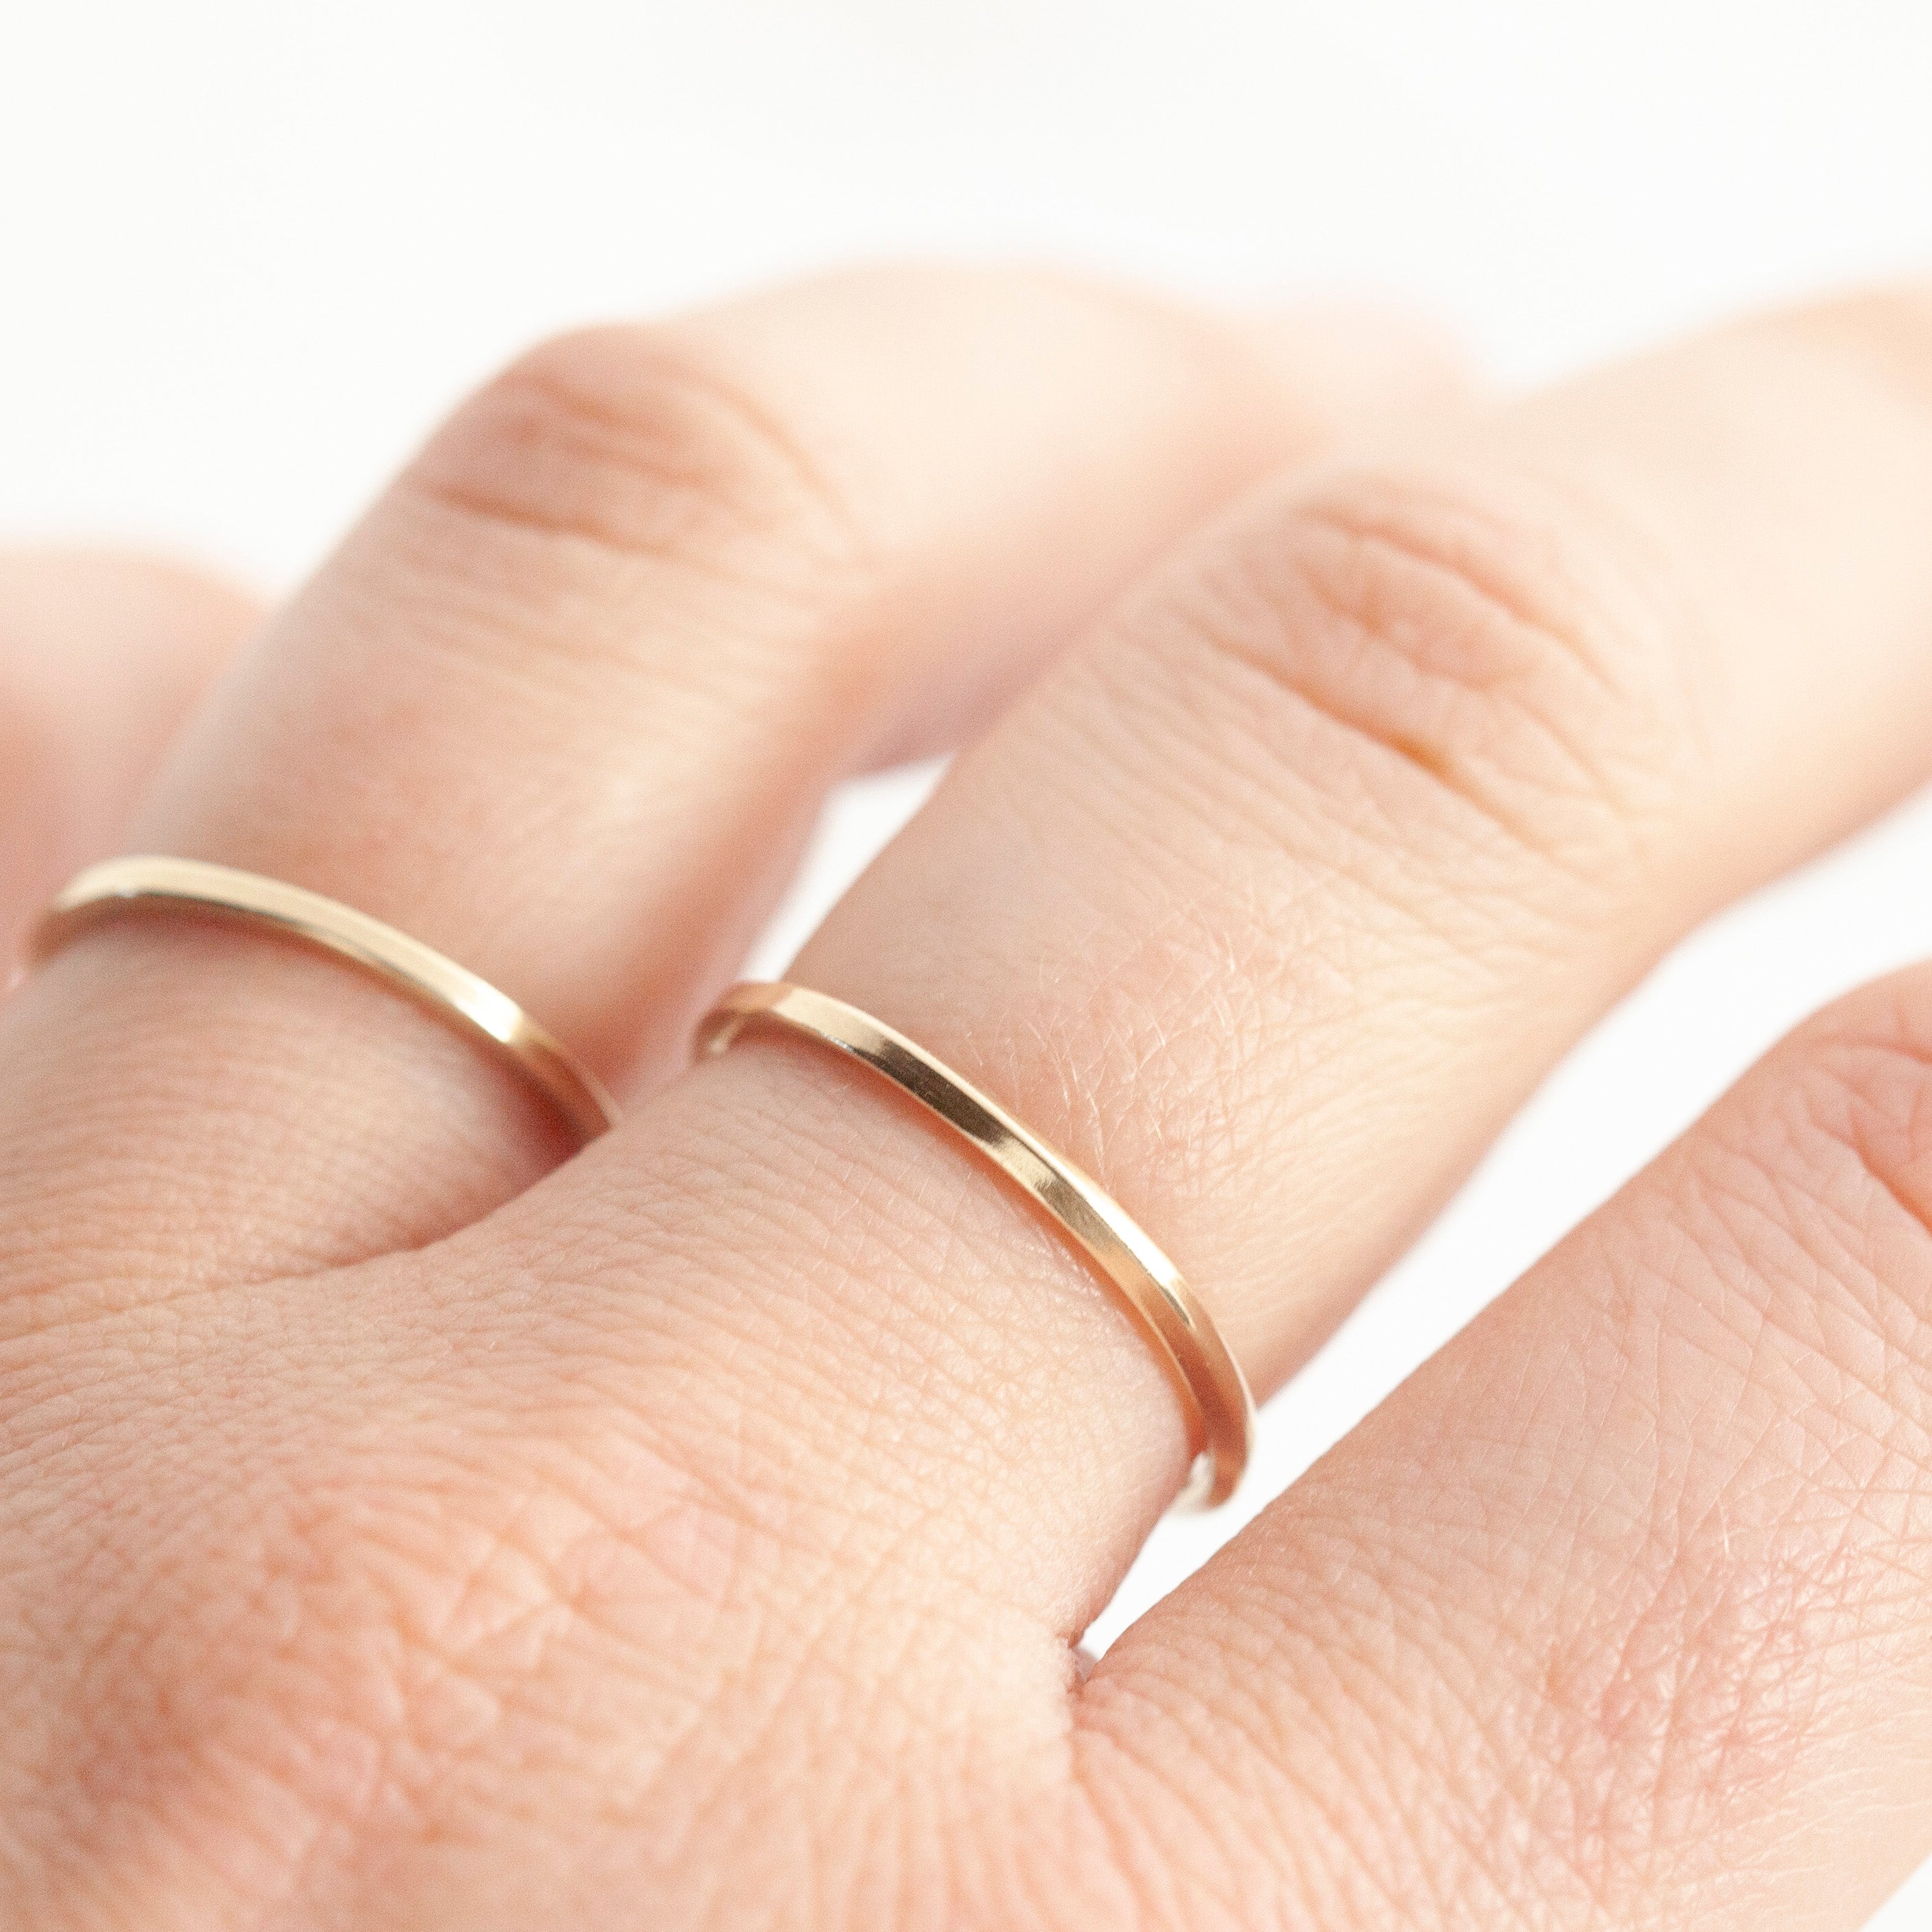 OOAK Simple square ring (with a twist!) in solid 14k • size 58,75 (ready to ship)